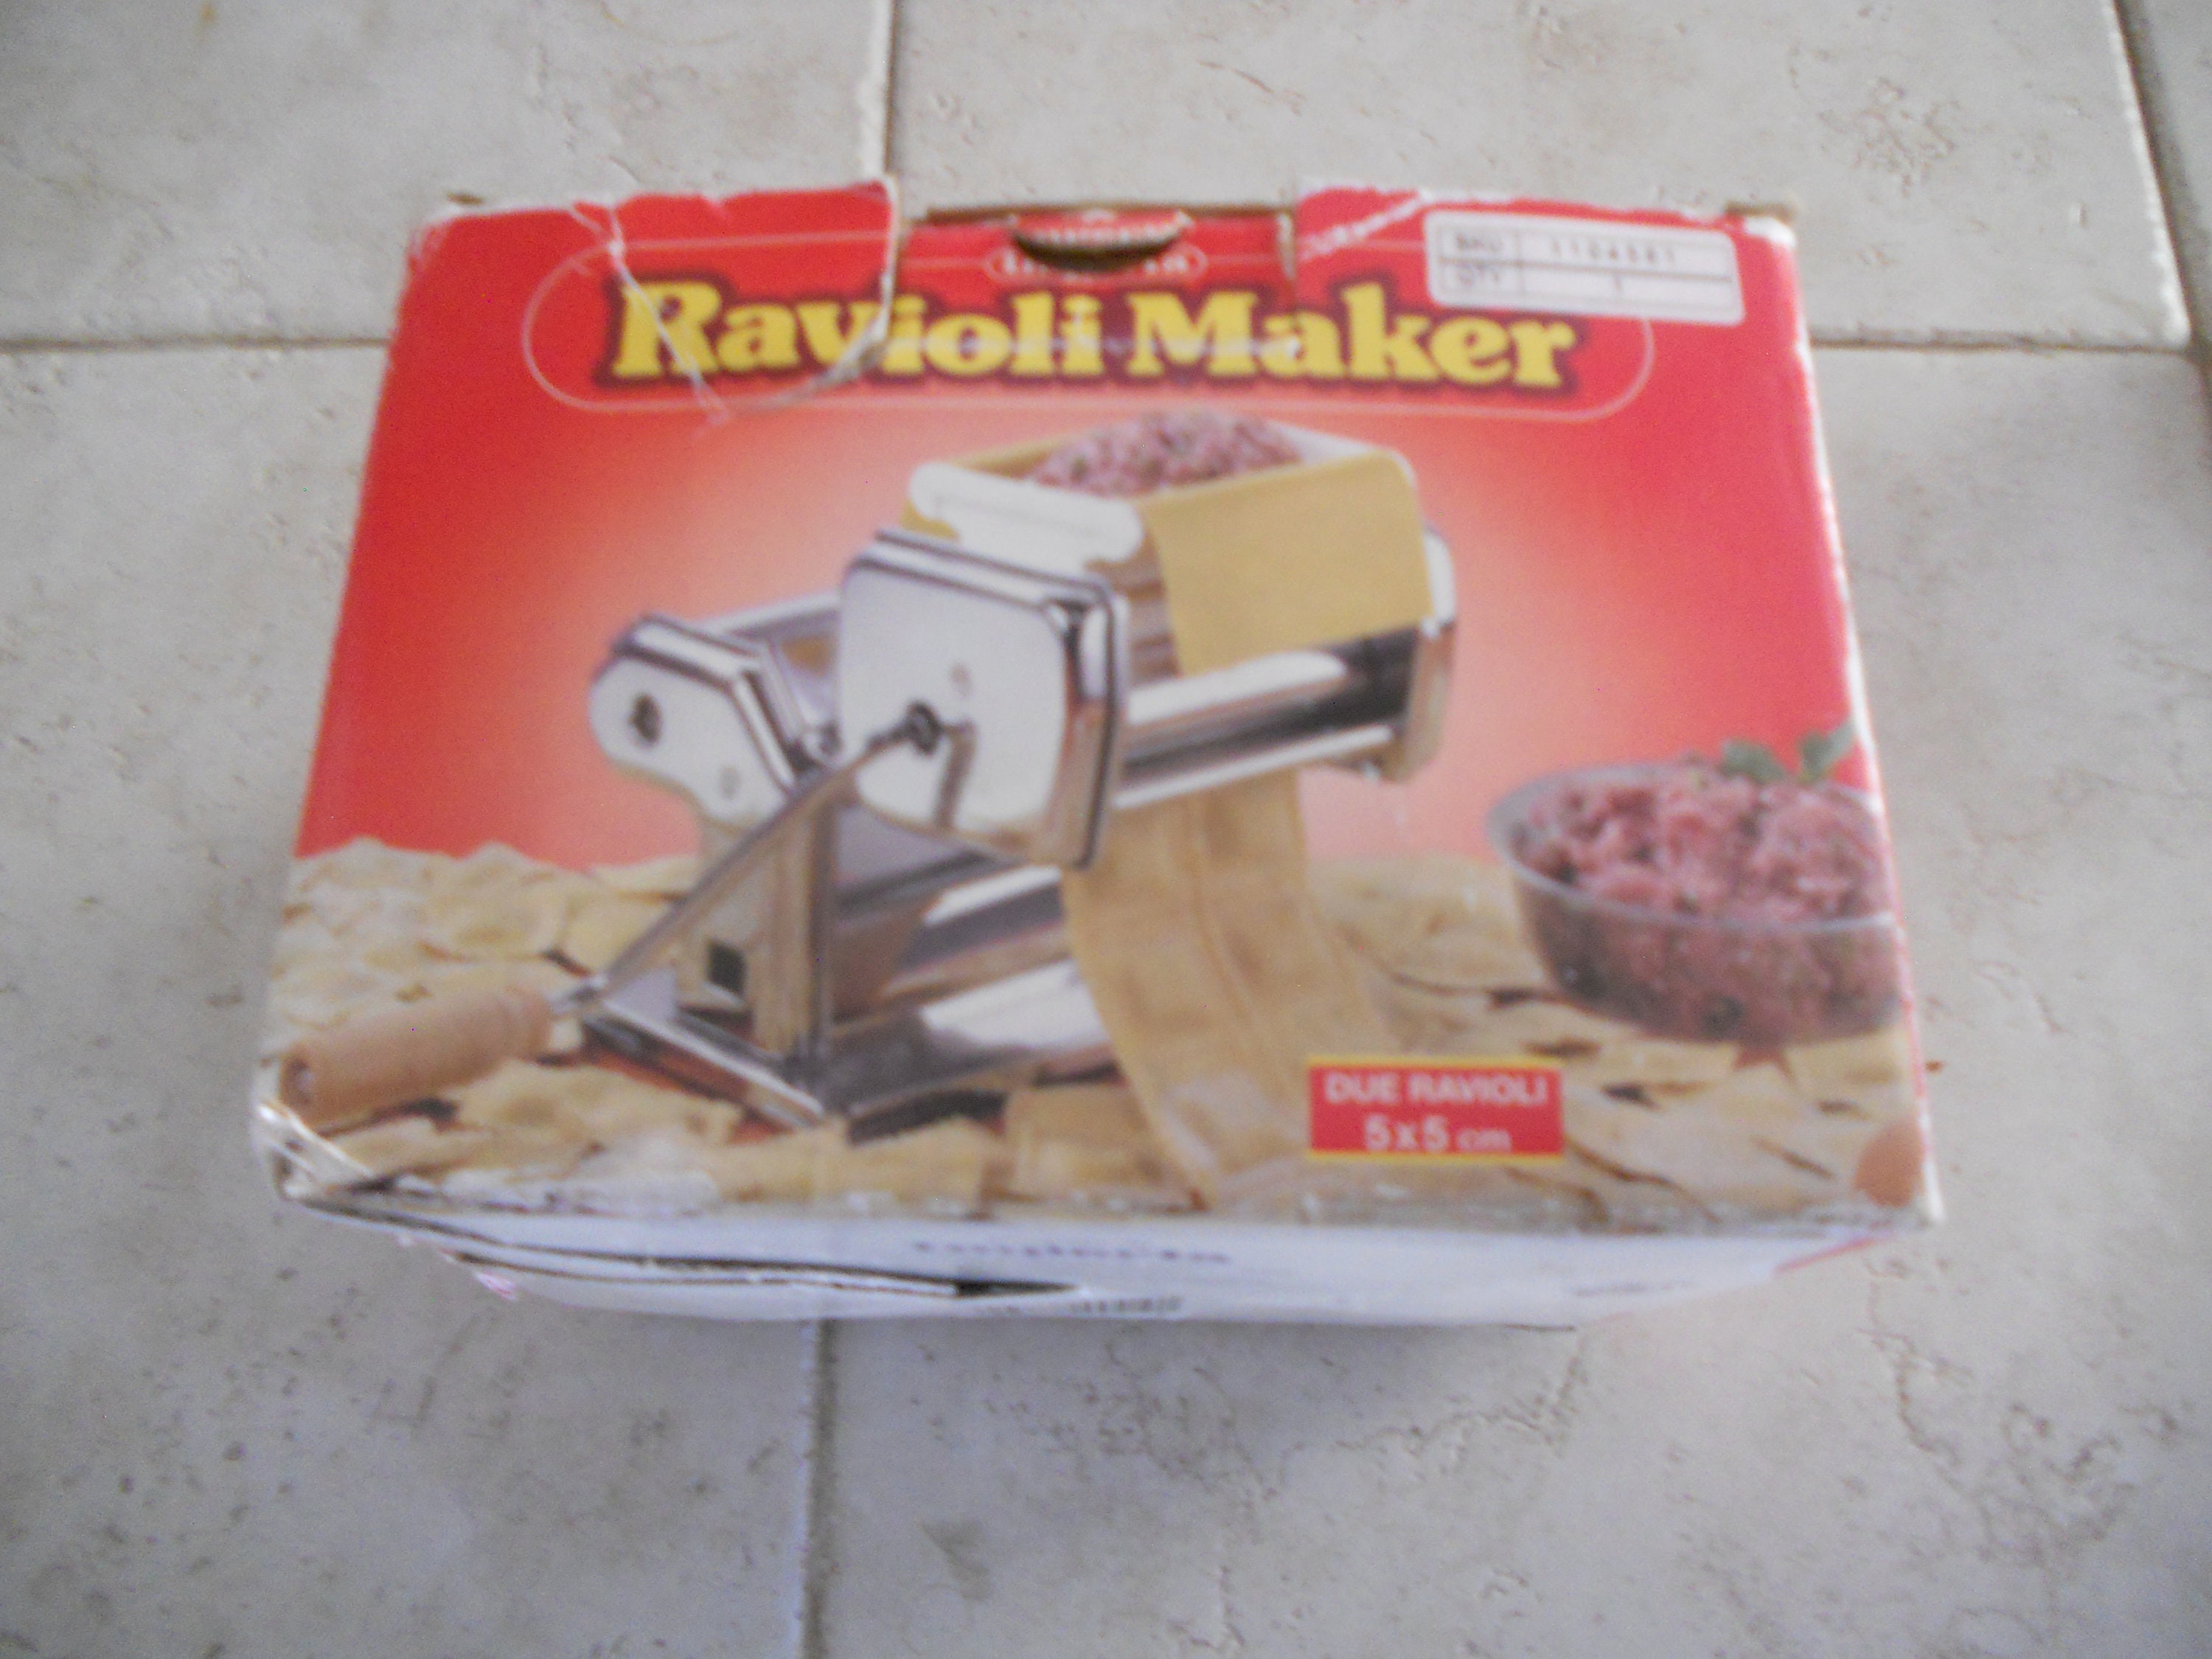 Imperia Pasta Maker Machine - household items - by owner